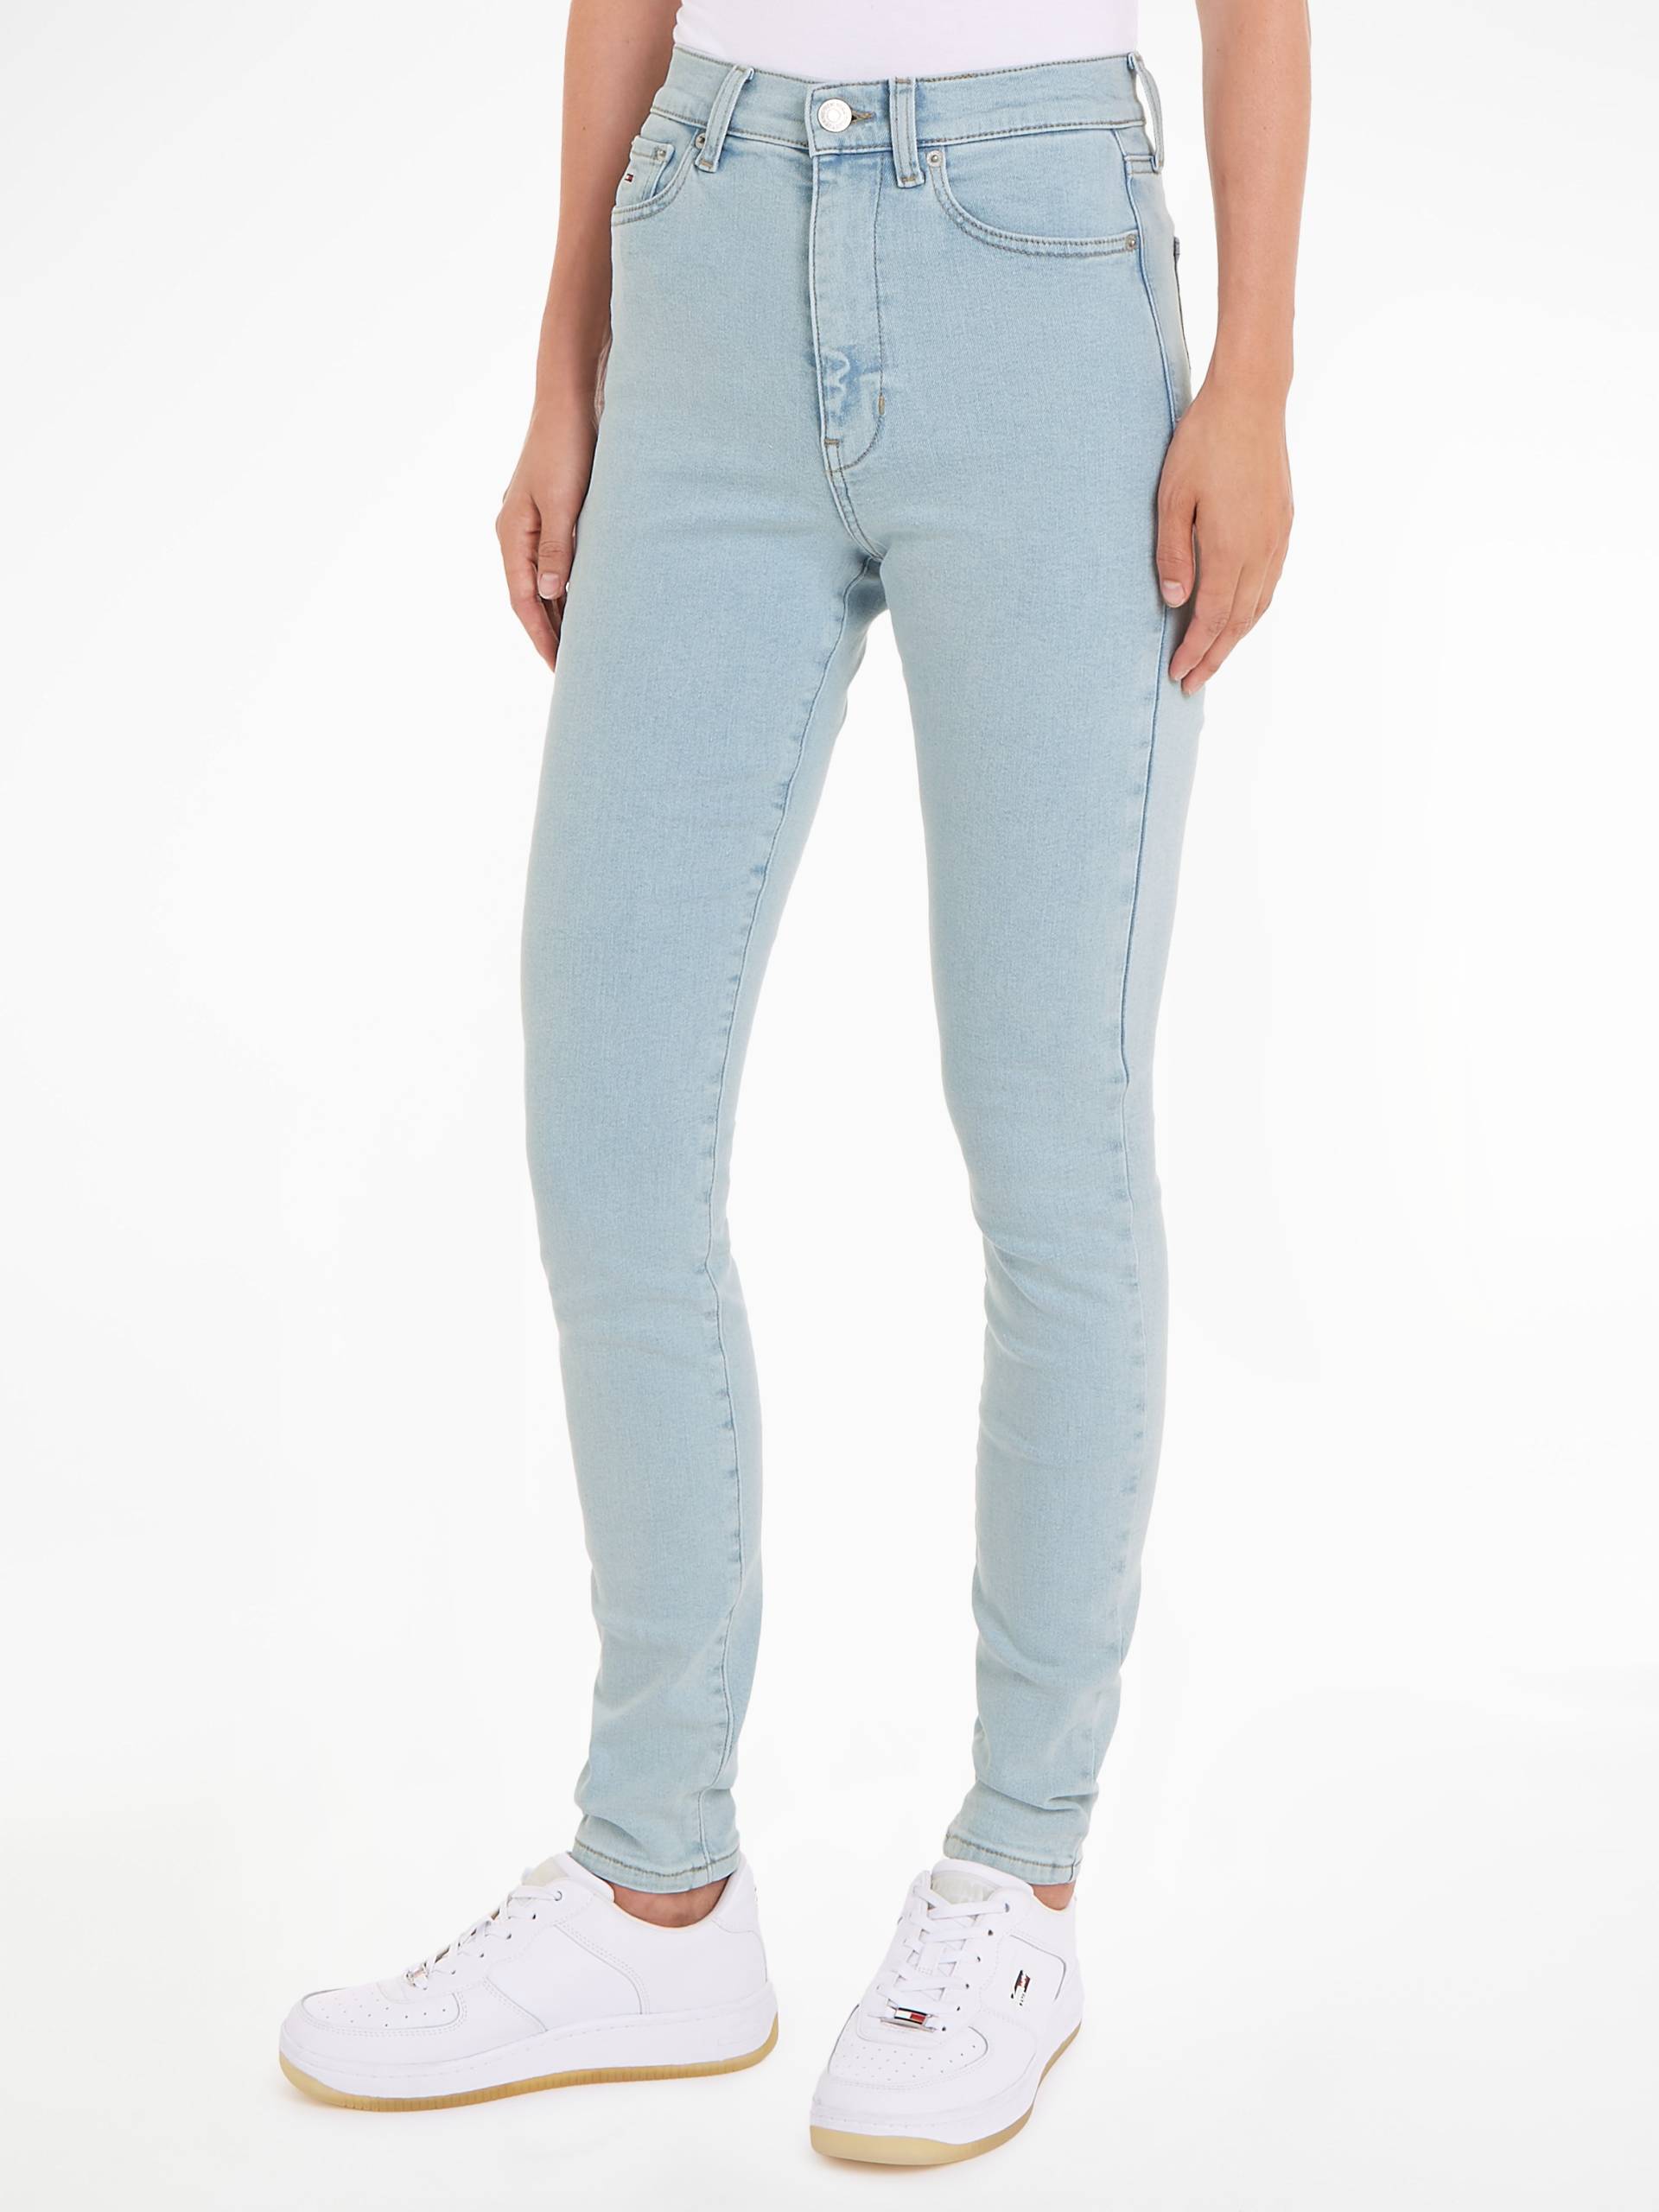 Tommy Jeans Bequeme Jeans »Sylvia Skinny Slim Jeans Hohe Leibhöhe« von Tommy Jeans